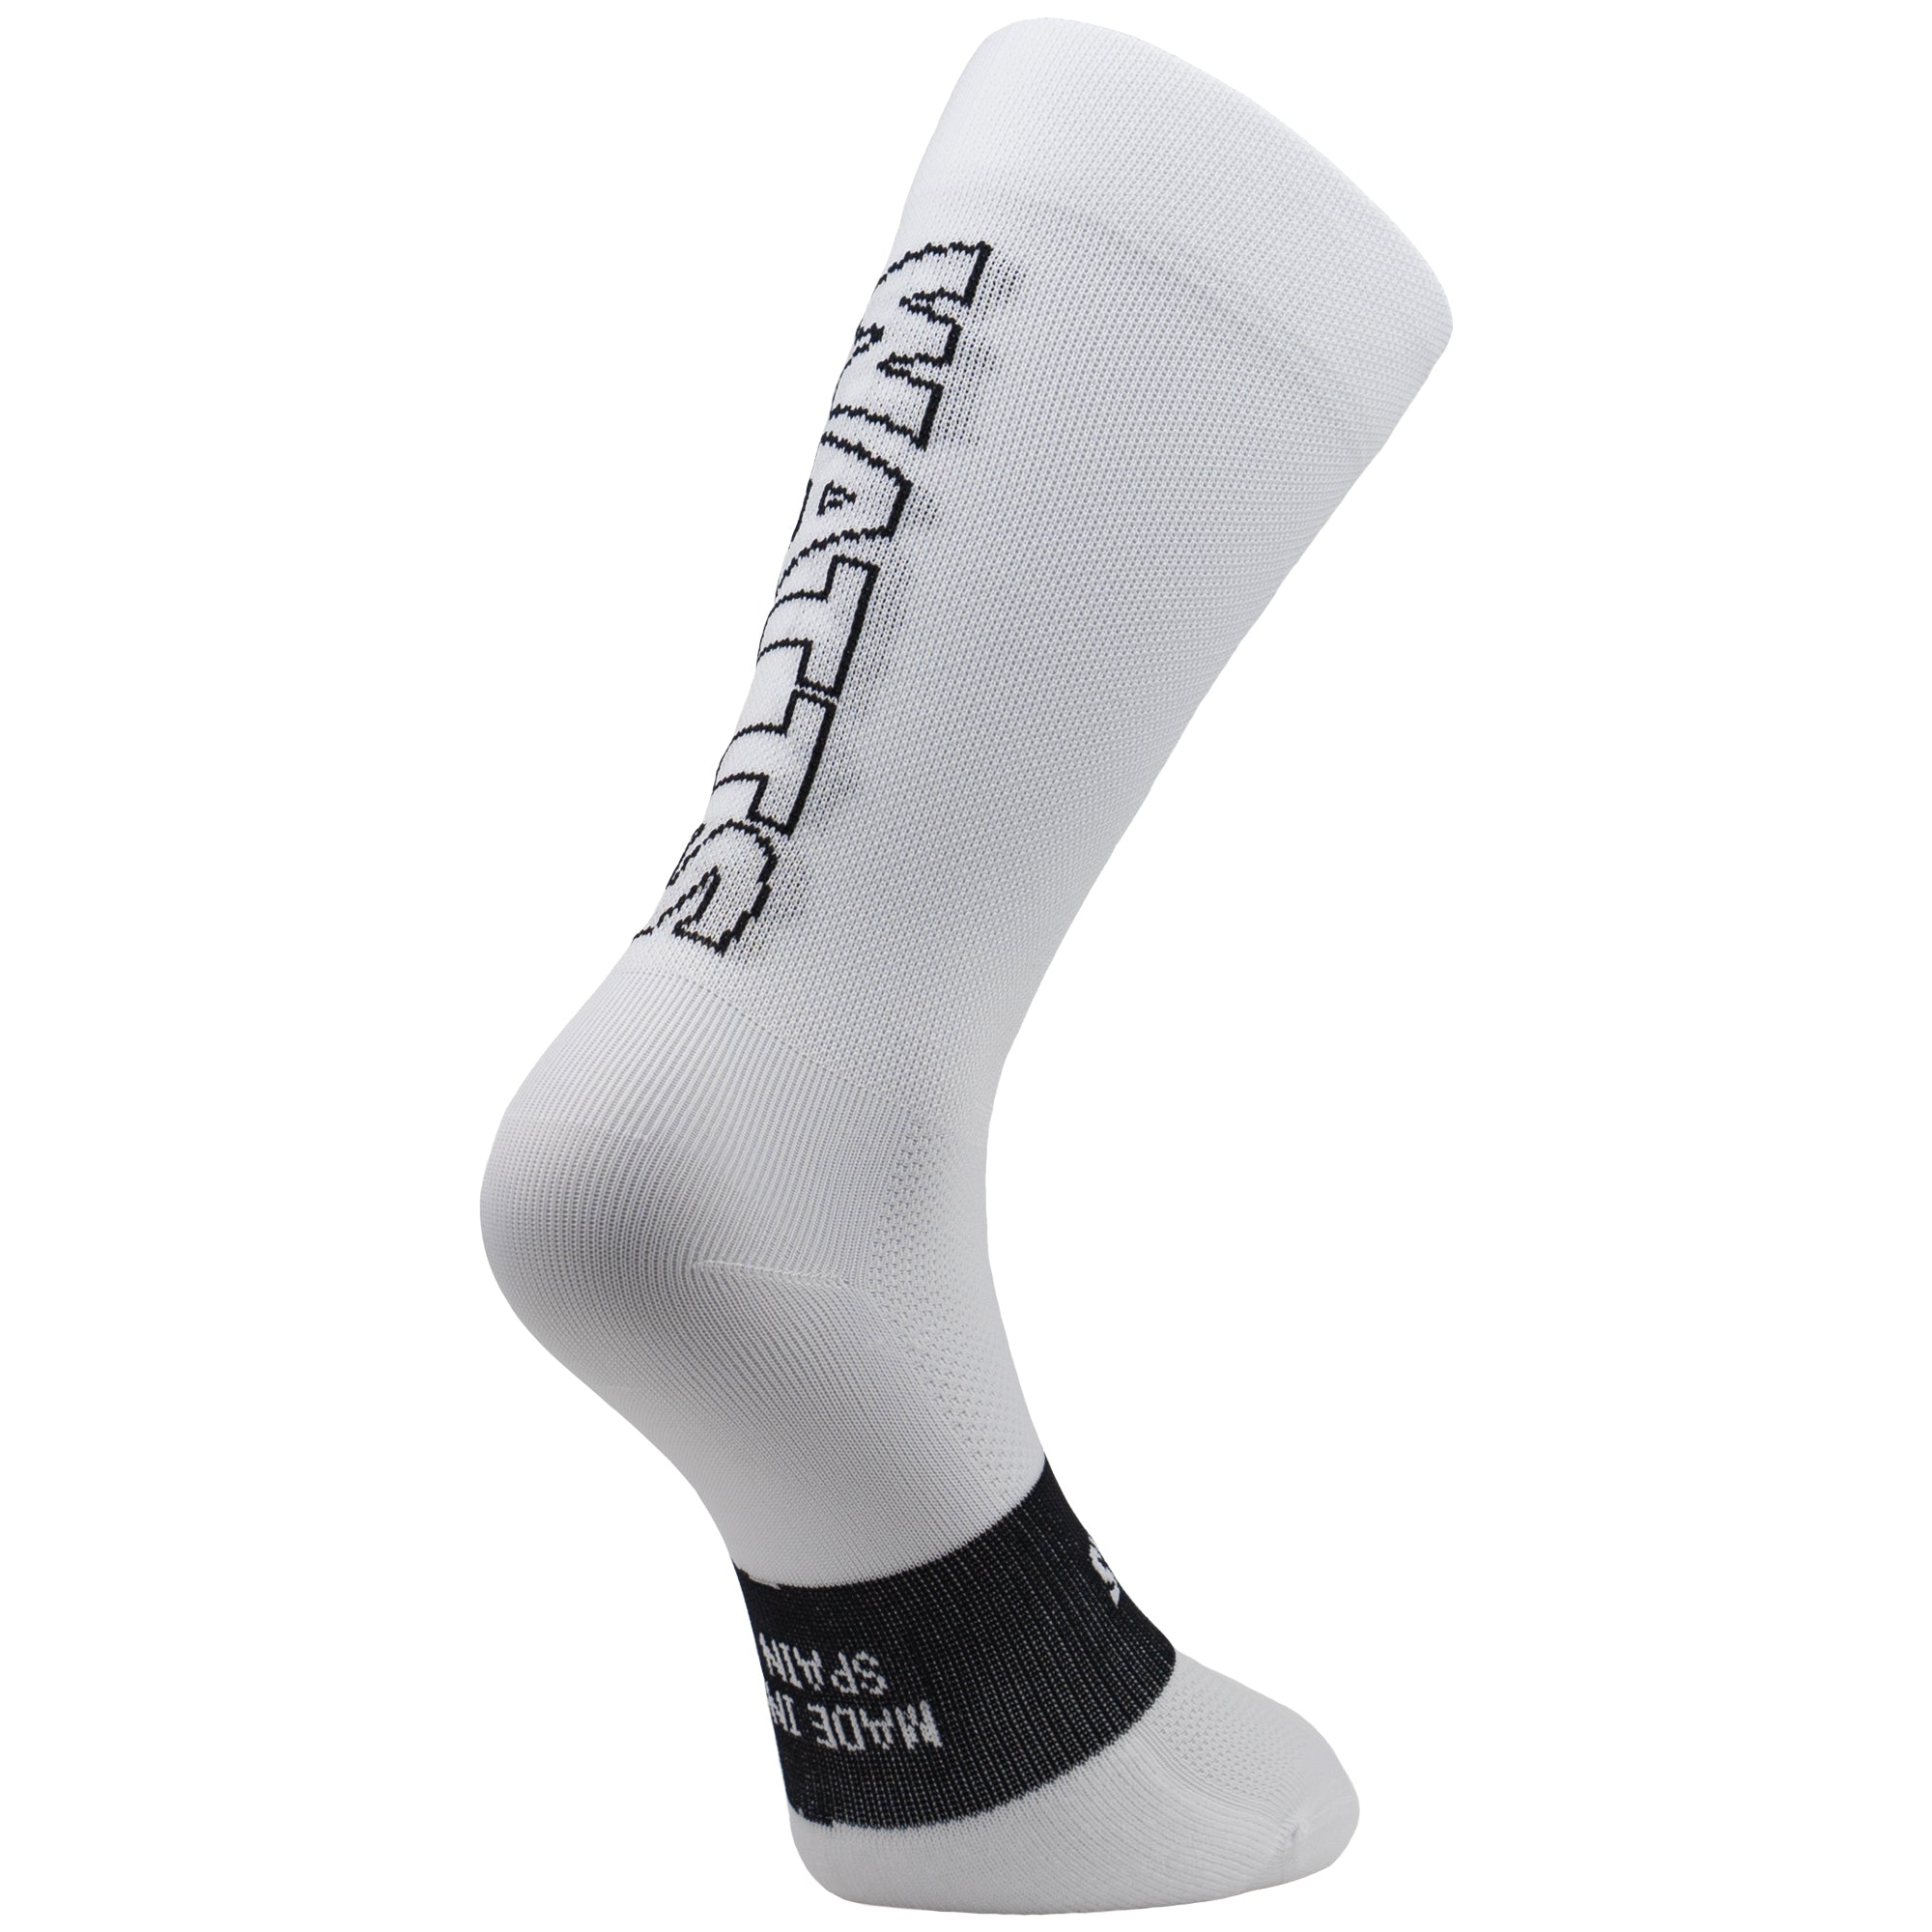 Calcetines ciclismo Ghosty White  Calcetines caña alta blancos